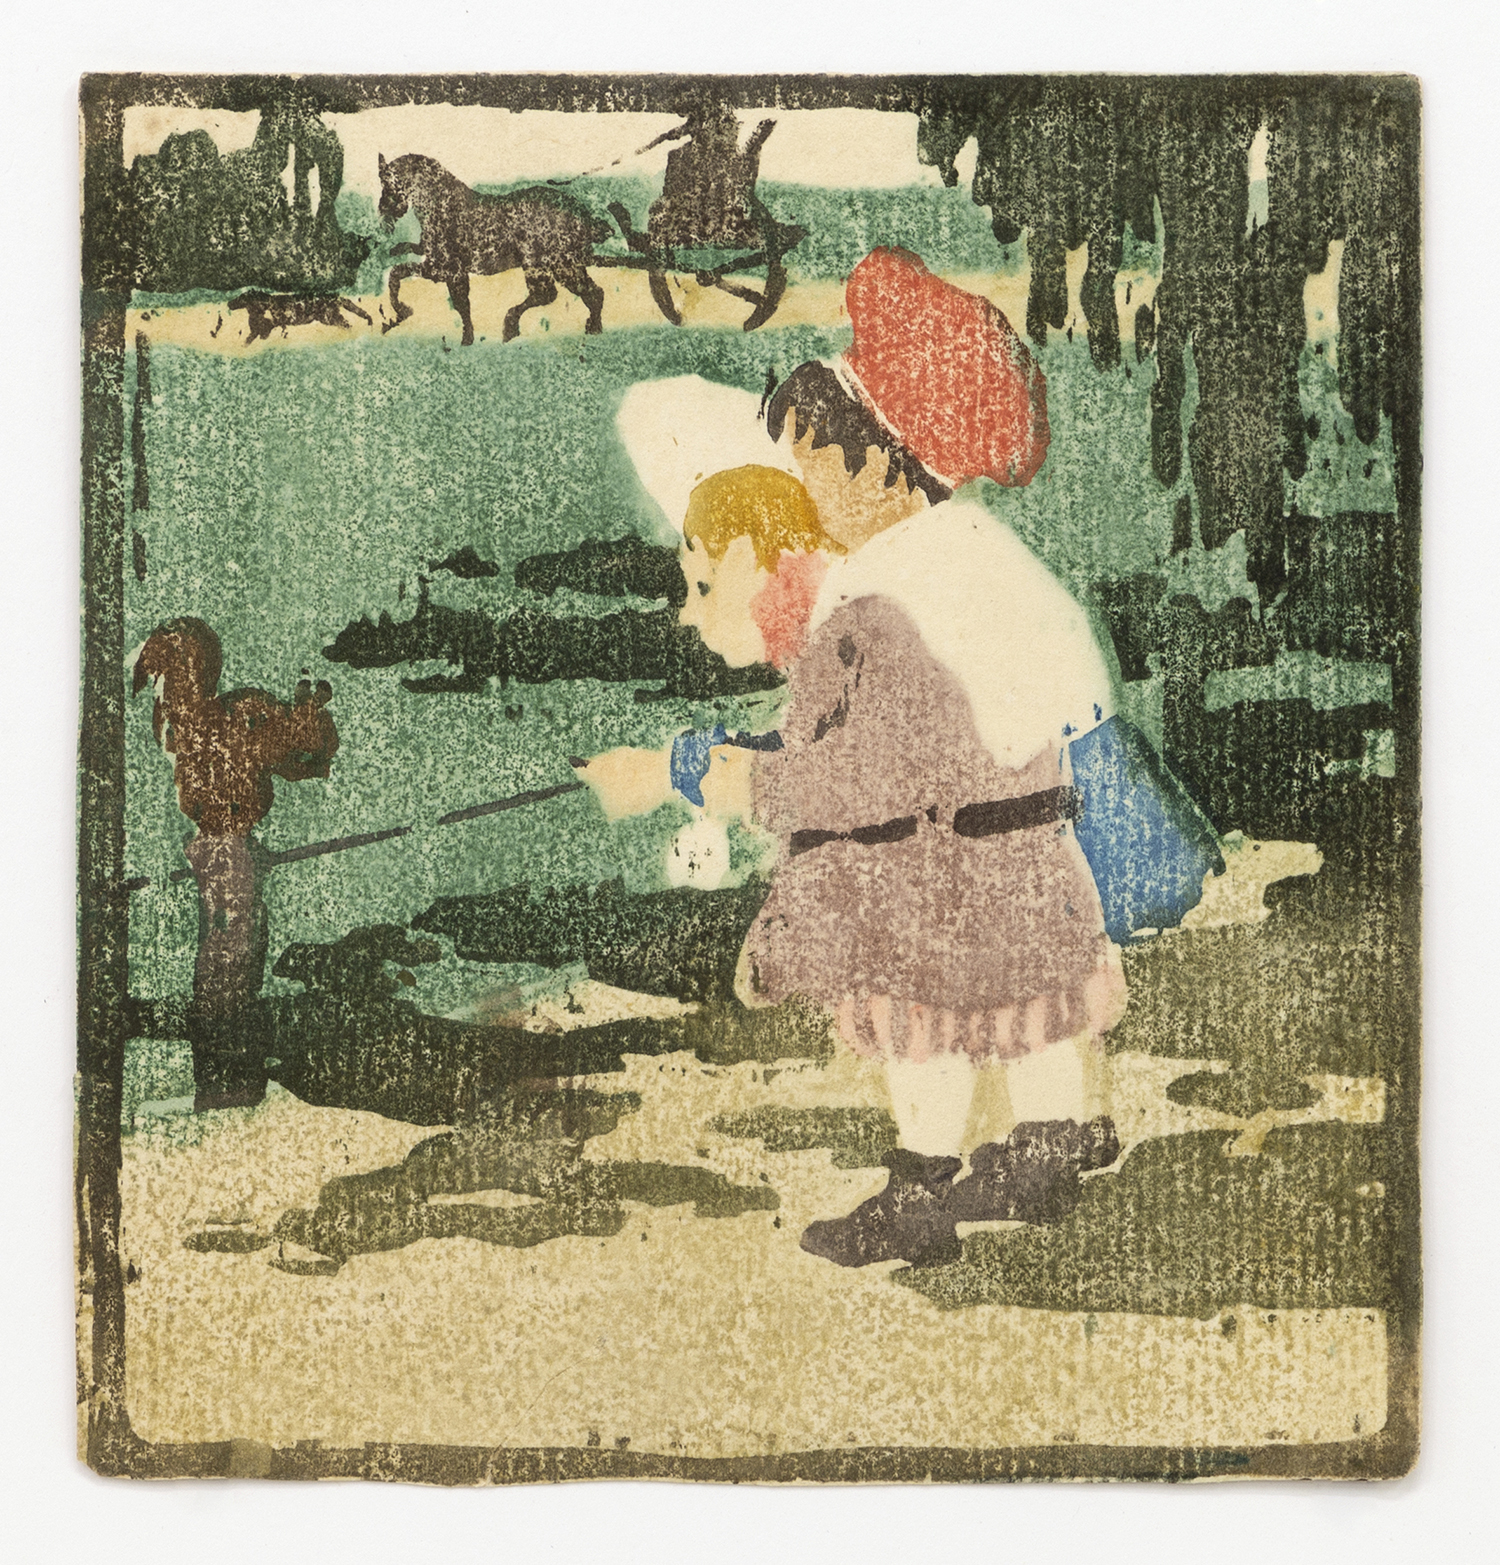 In the Park, 1904, Color woodblock, 5 1/8 x 4 7/8 inches (13 x 12.4 cm), Edition size unknown, rare